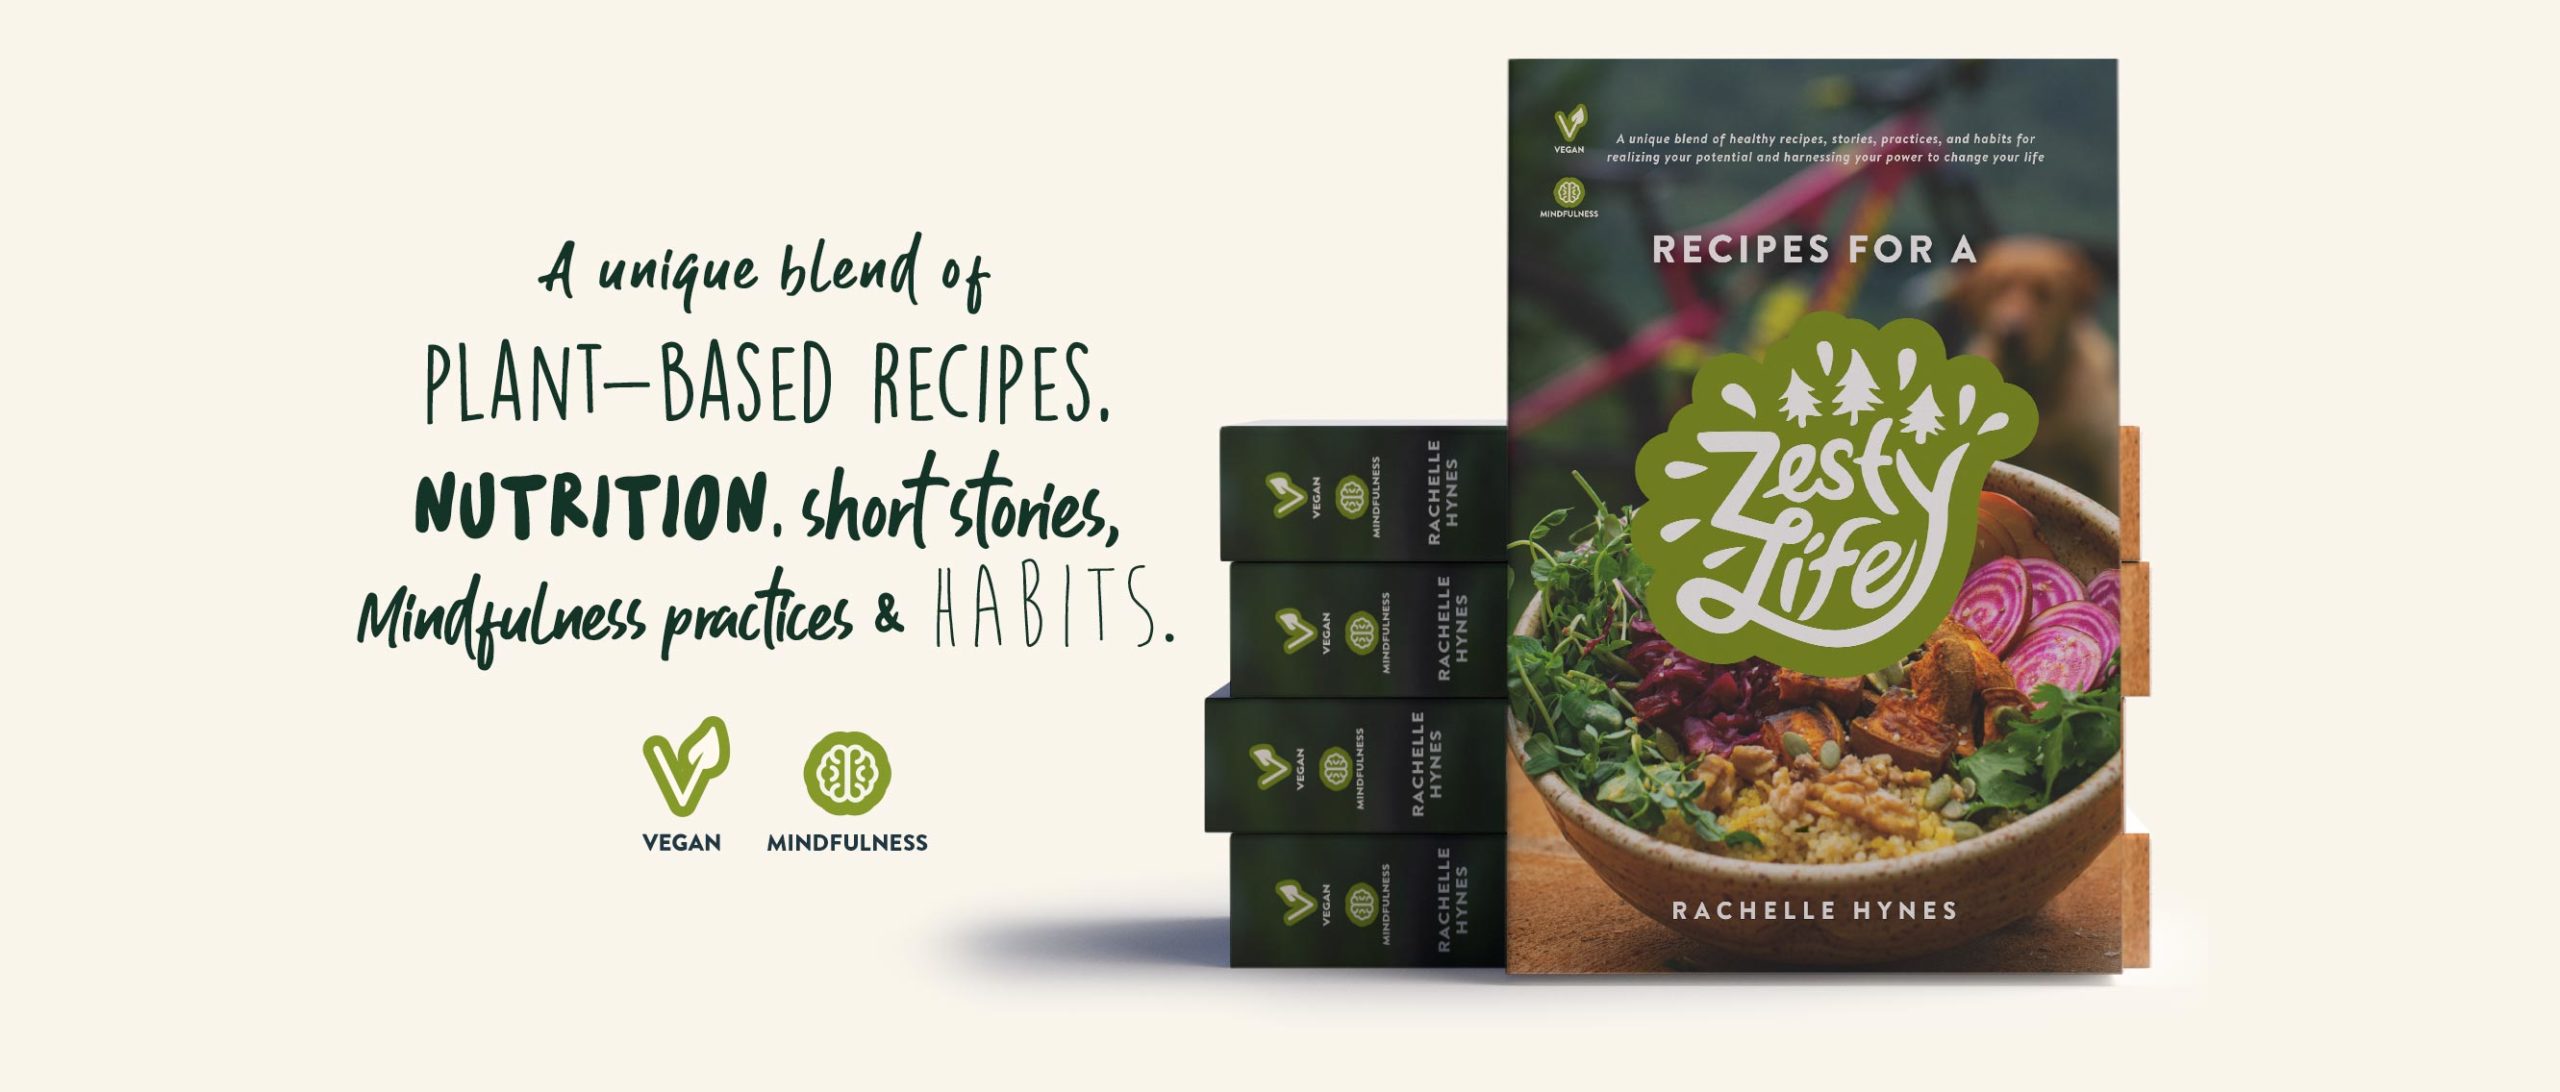 https://zestylife.ca/wp-content/uploads/2019/11/recipes-for-a-zesty-life-book-scaled.jpg